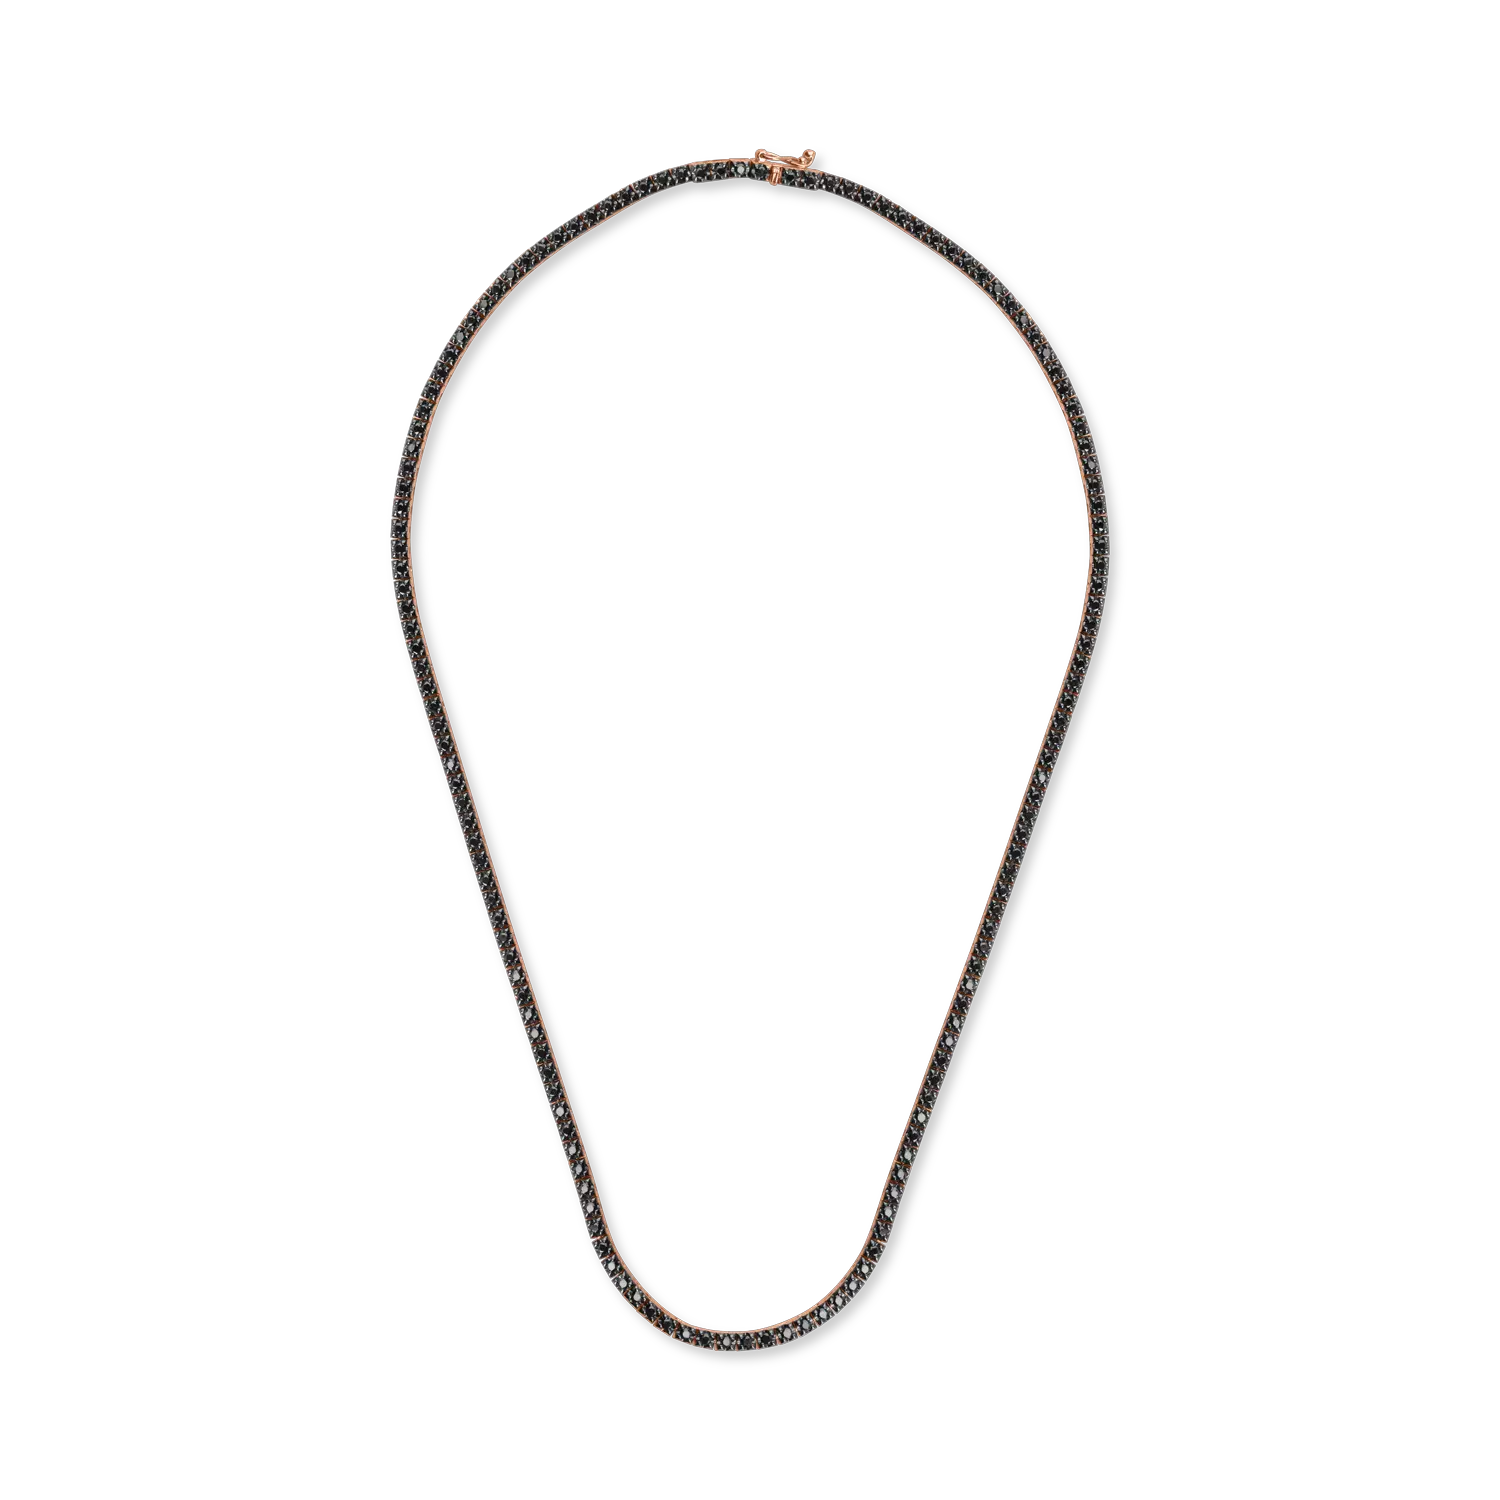 Rose-black gold tennis necklace with 3.11ct black diamonds